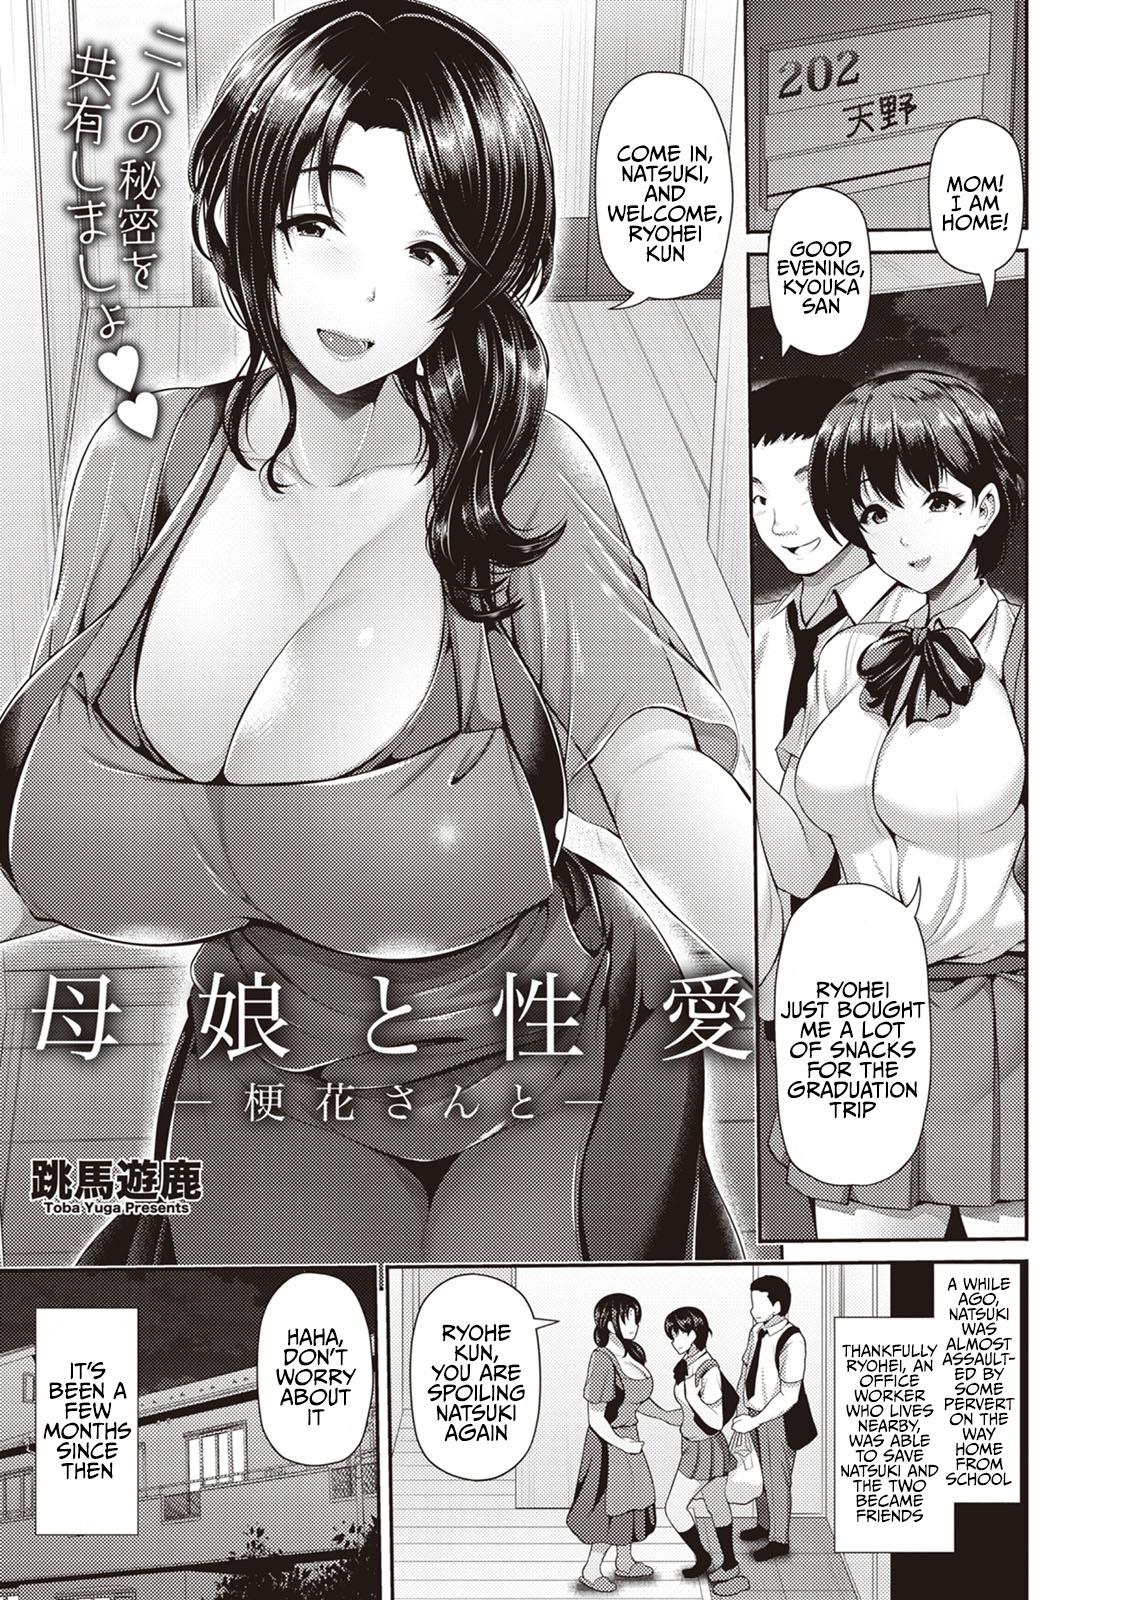 Anal Licking Oyako to Seiai | Sexual Relations with Mother and Daughter ~ Kyouka San Carro - Page 2